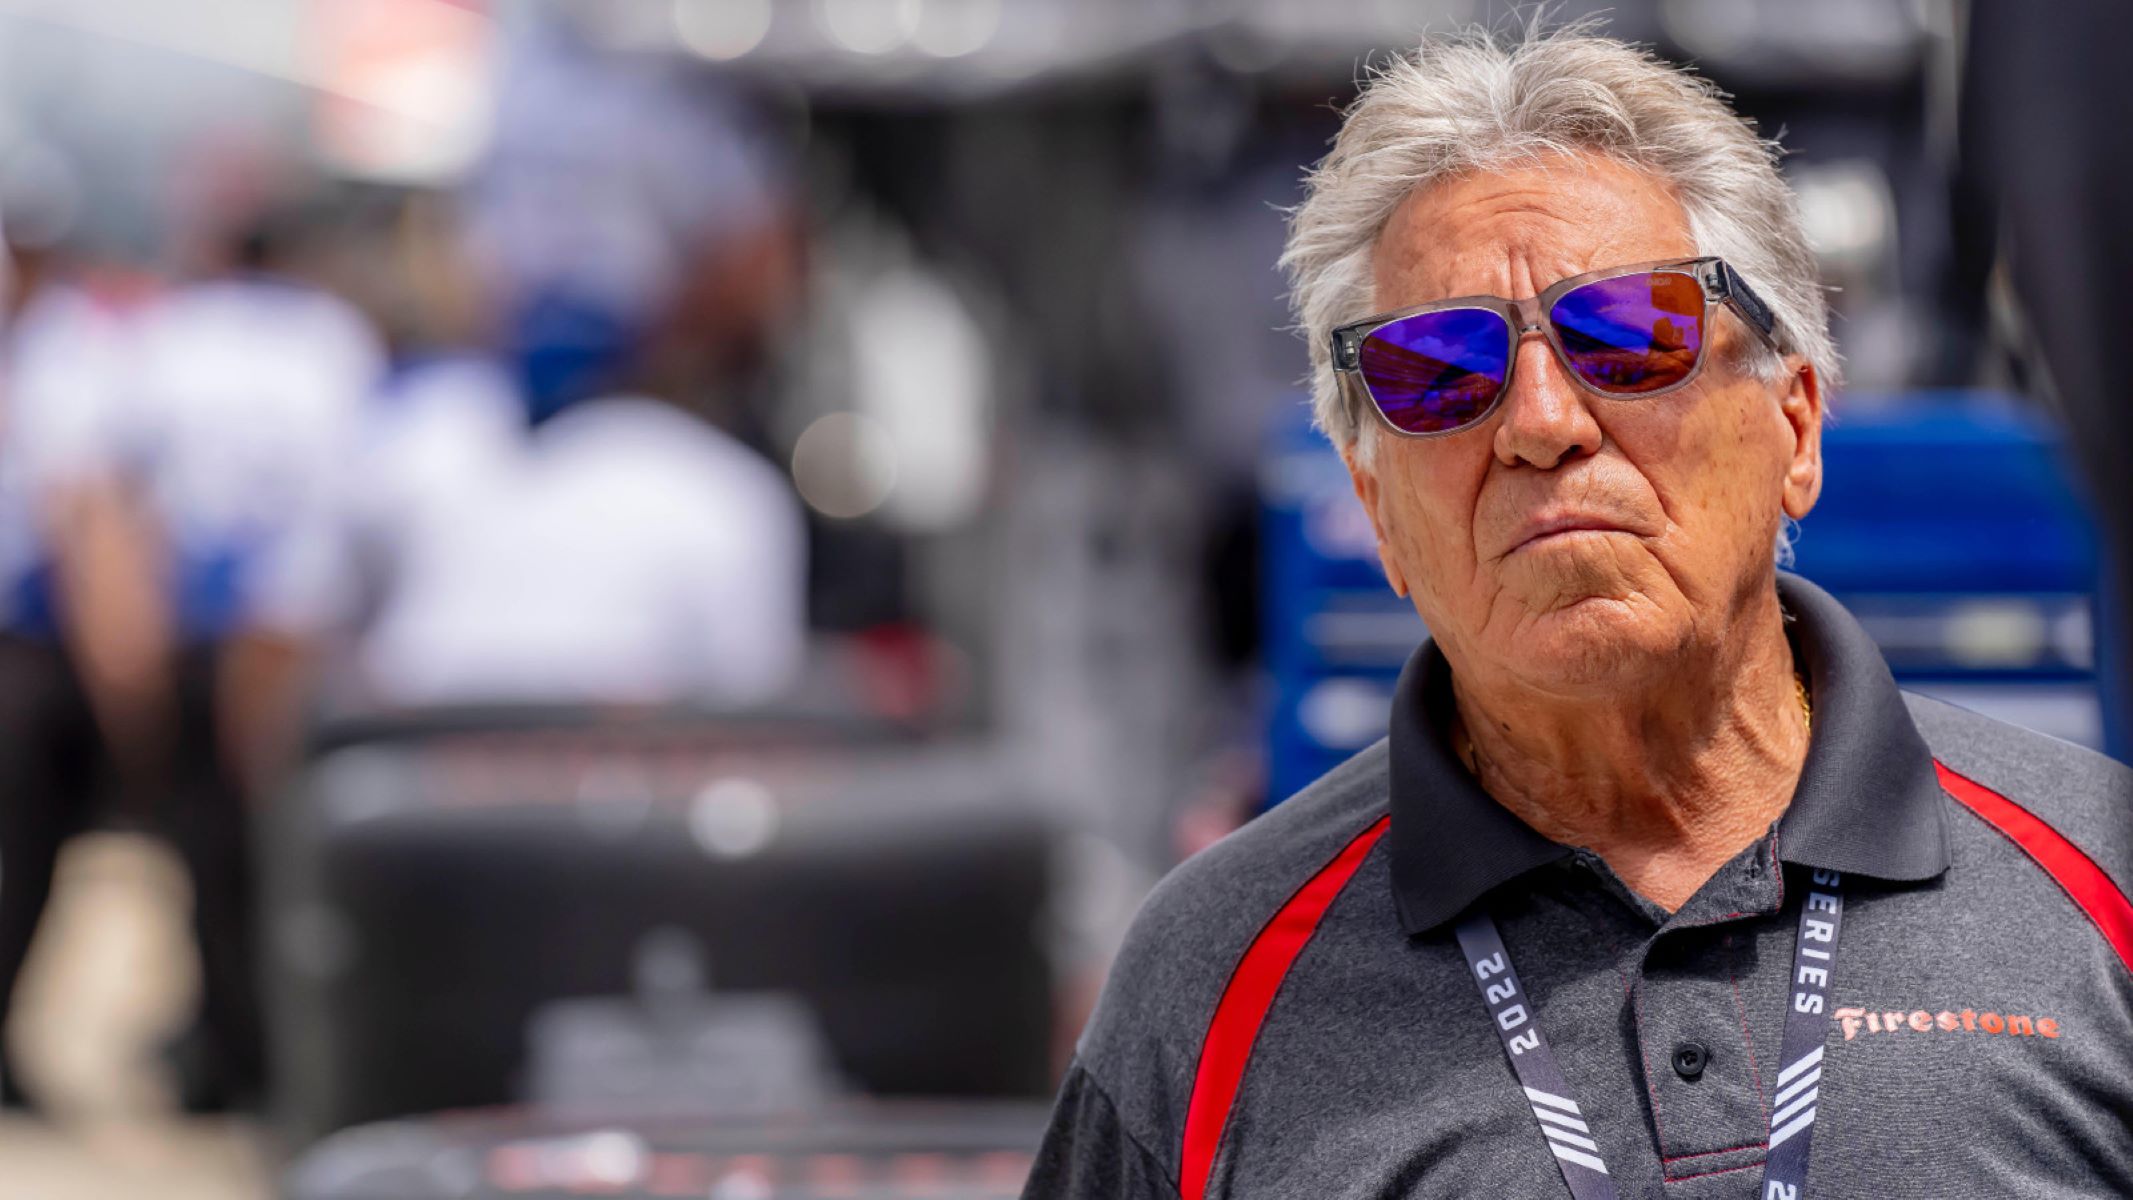 25 Unbelievable Facts About Mario Andretti - Facts.net